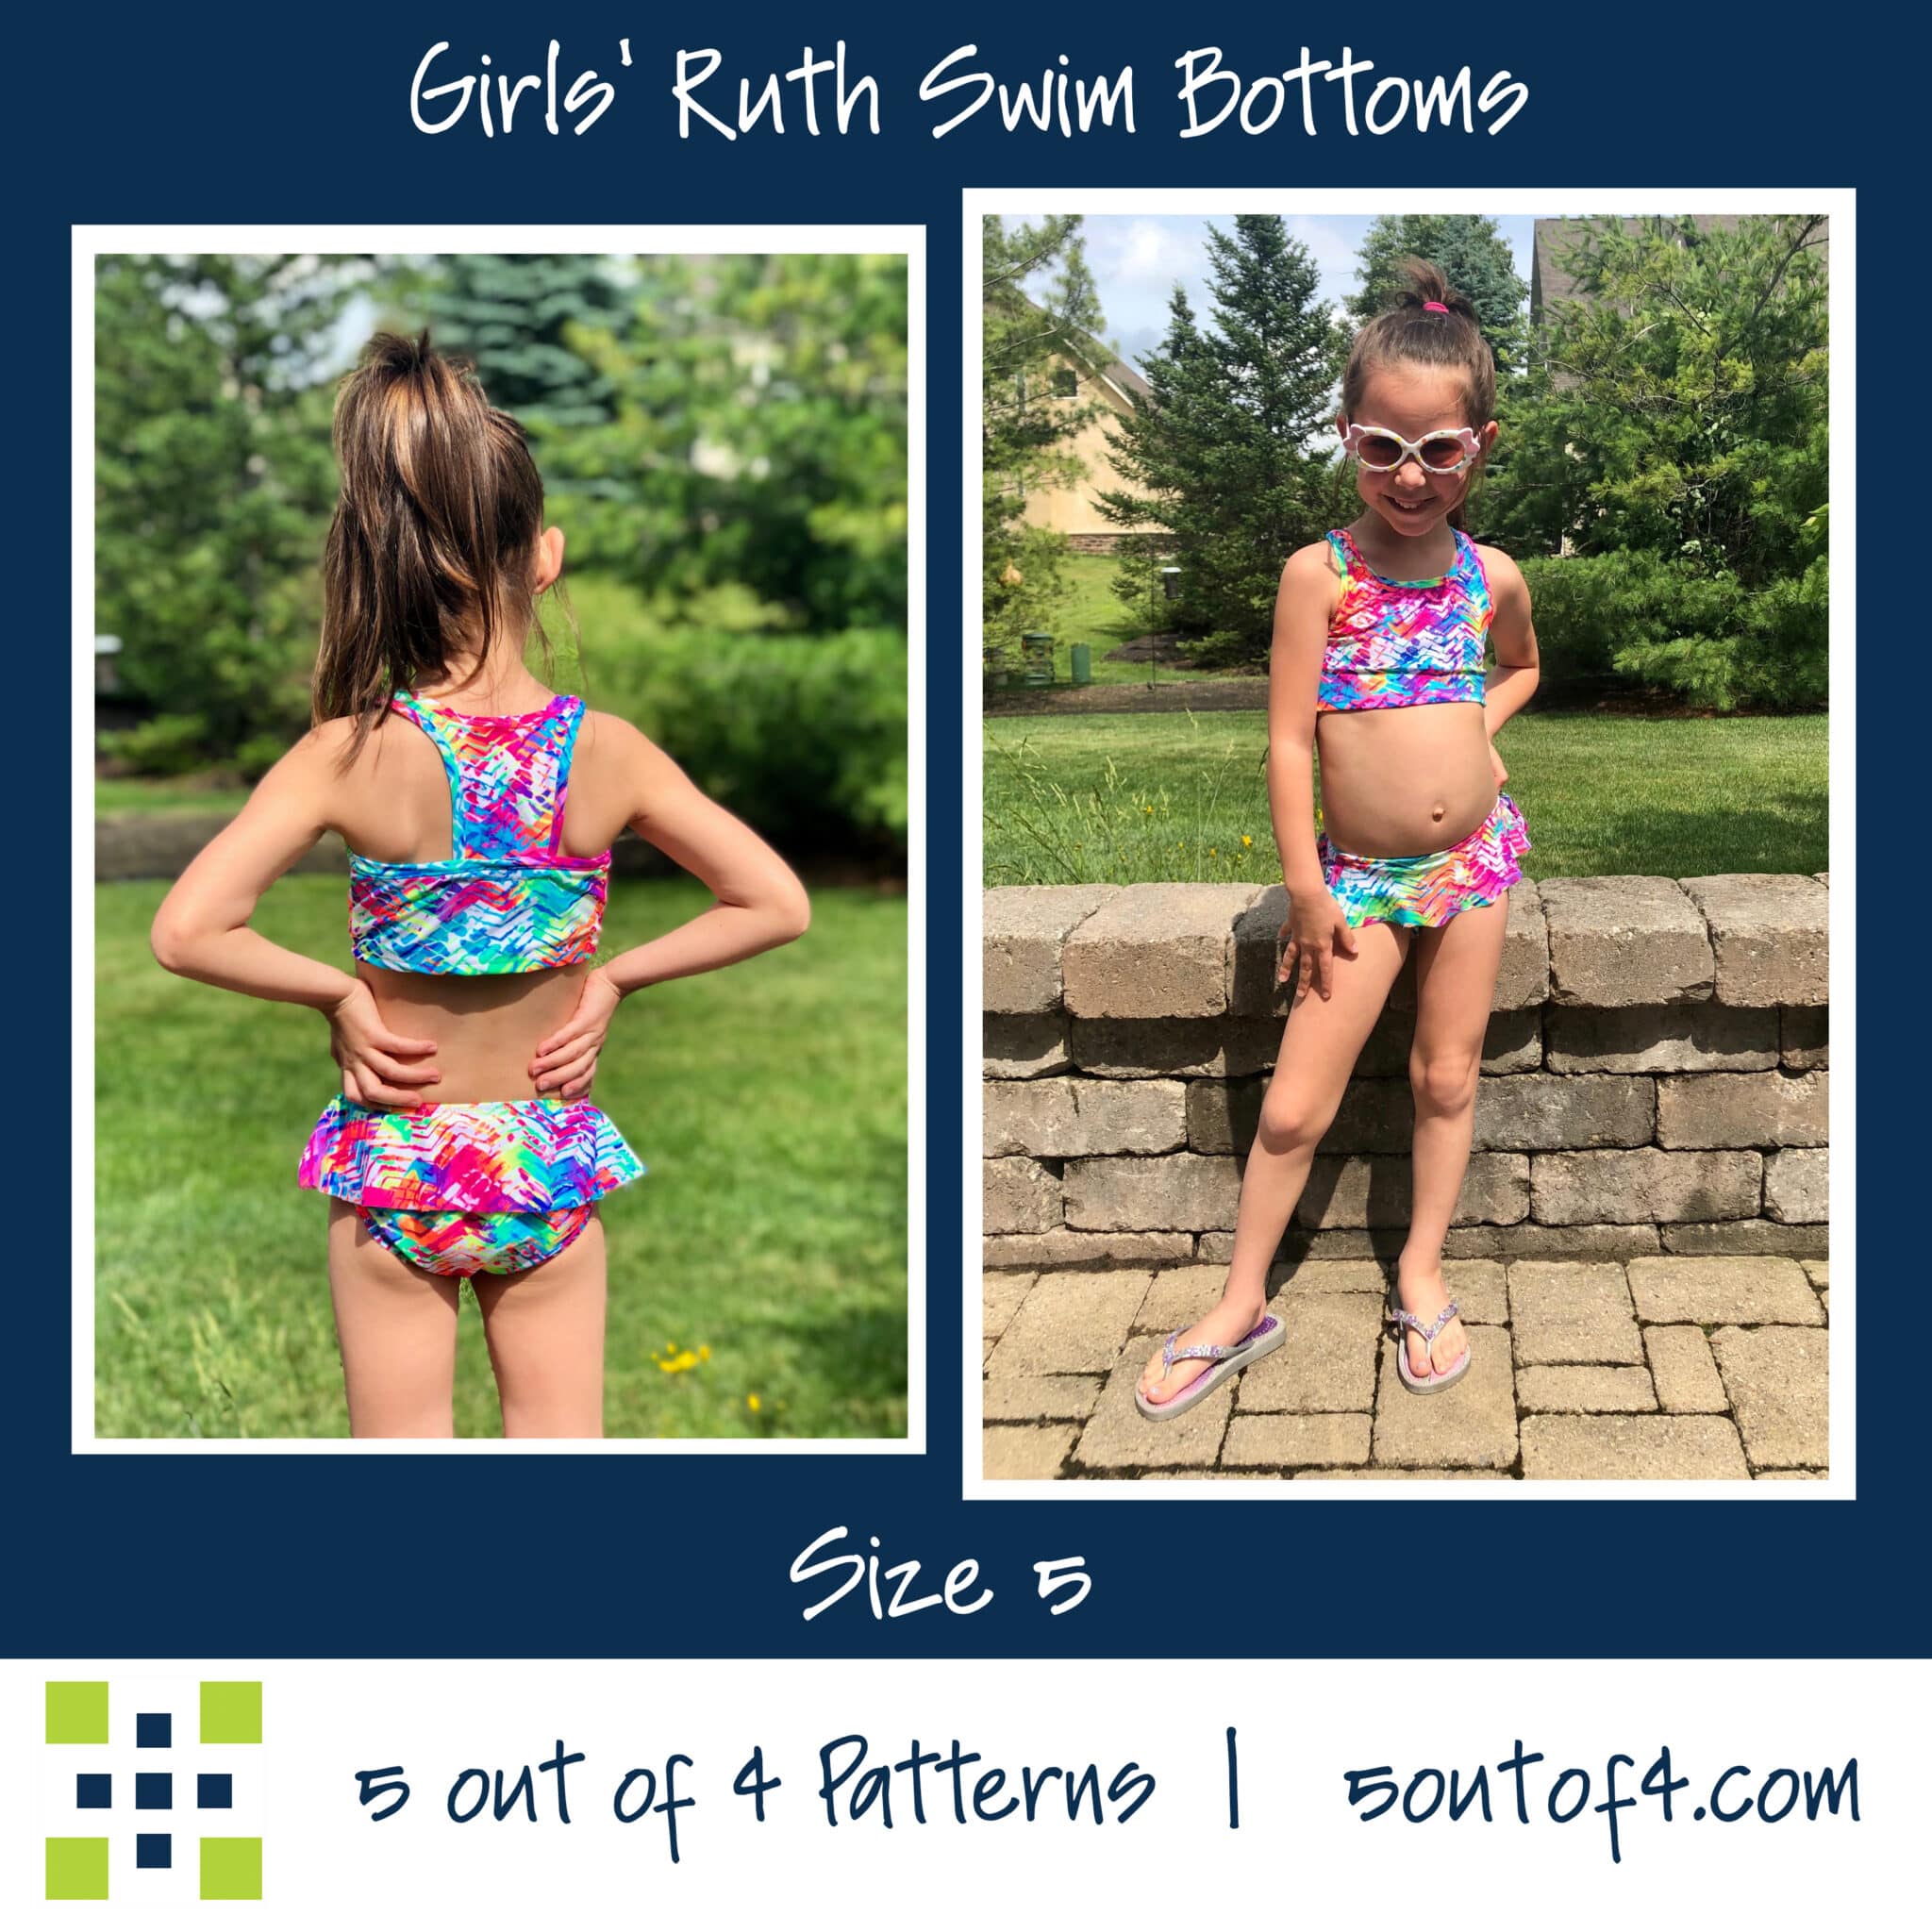 5 out of 4 - Who is ready to sew swimwear? 🙋‍♀️ @iemsewhappy made this  adorable swimsuit from the Kids' Agility Tank and Dress pattern and the  Kids' Ruth Swim Bottoms pattern.